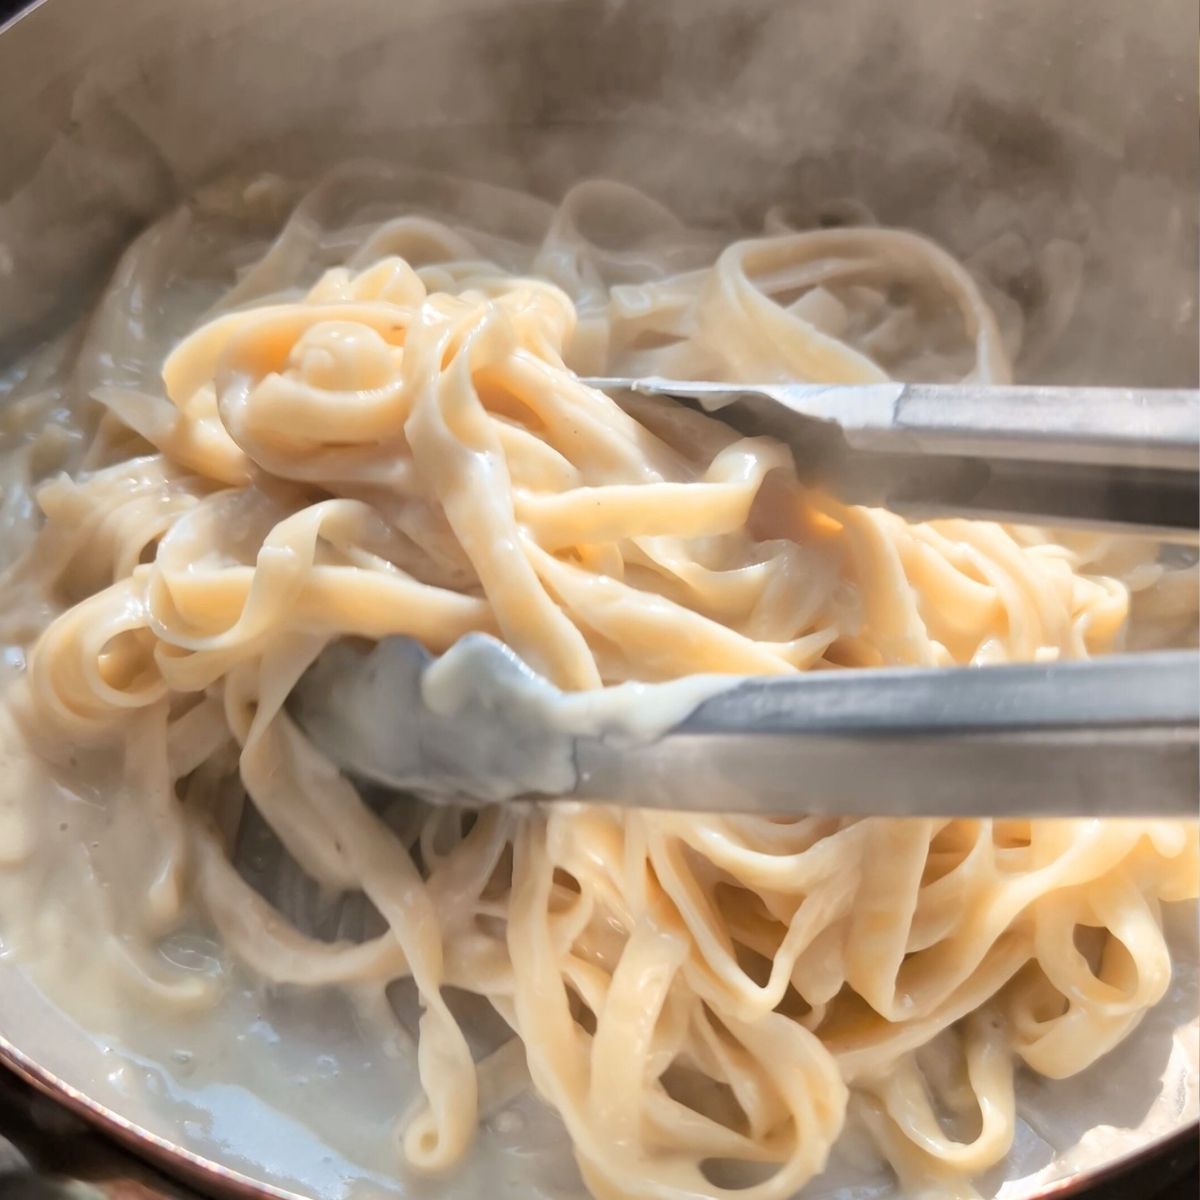 tongs tossing fresh fettuccine pasta with a creamy vegan oat milk sauce for a plant based vegan alfredo with oat milk.